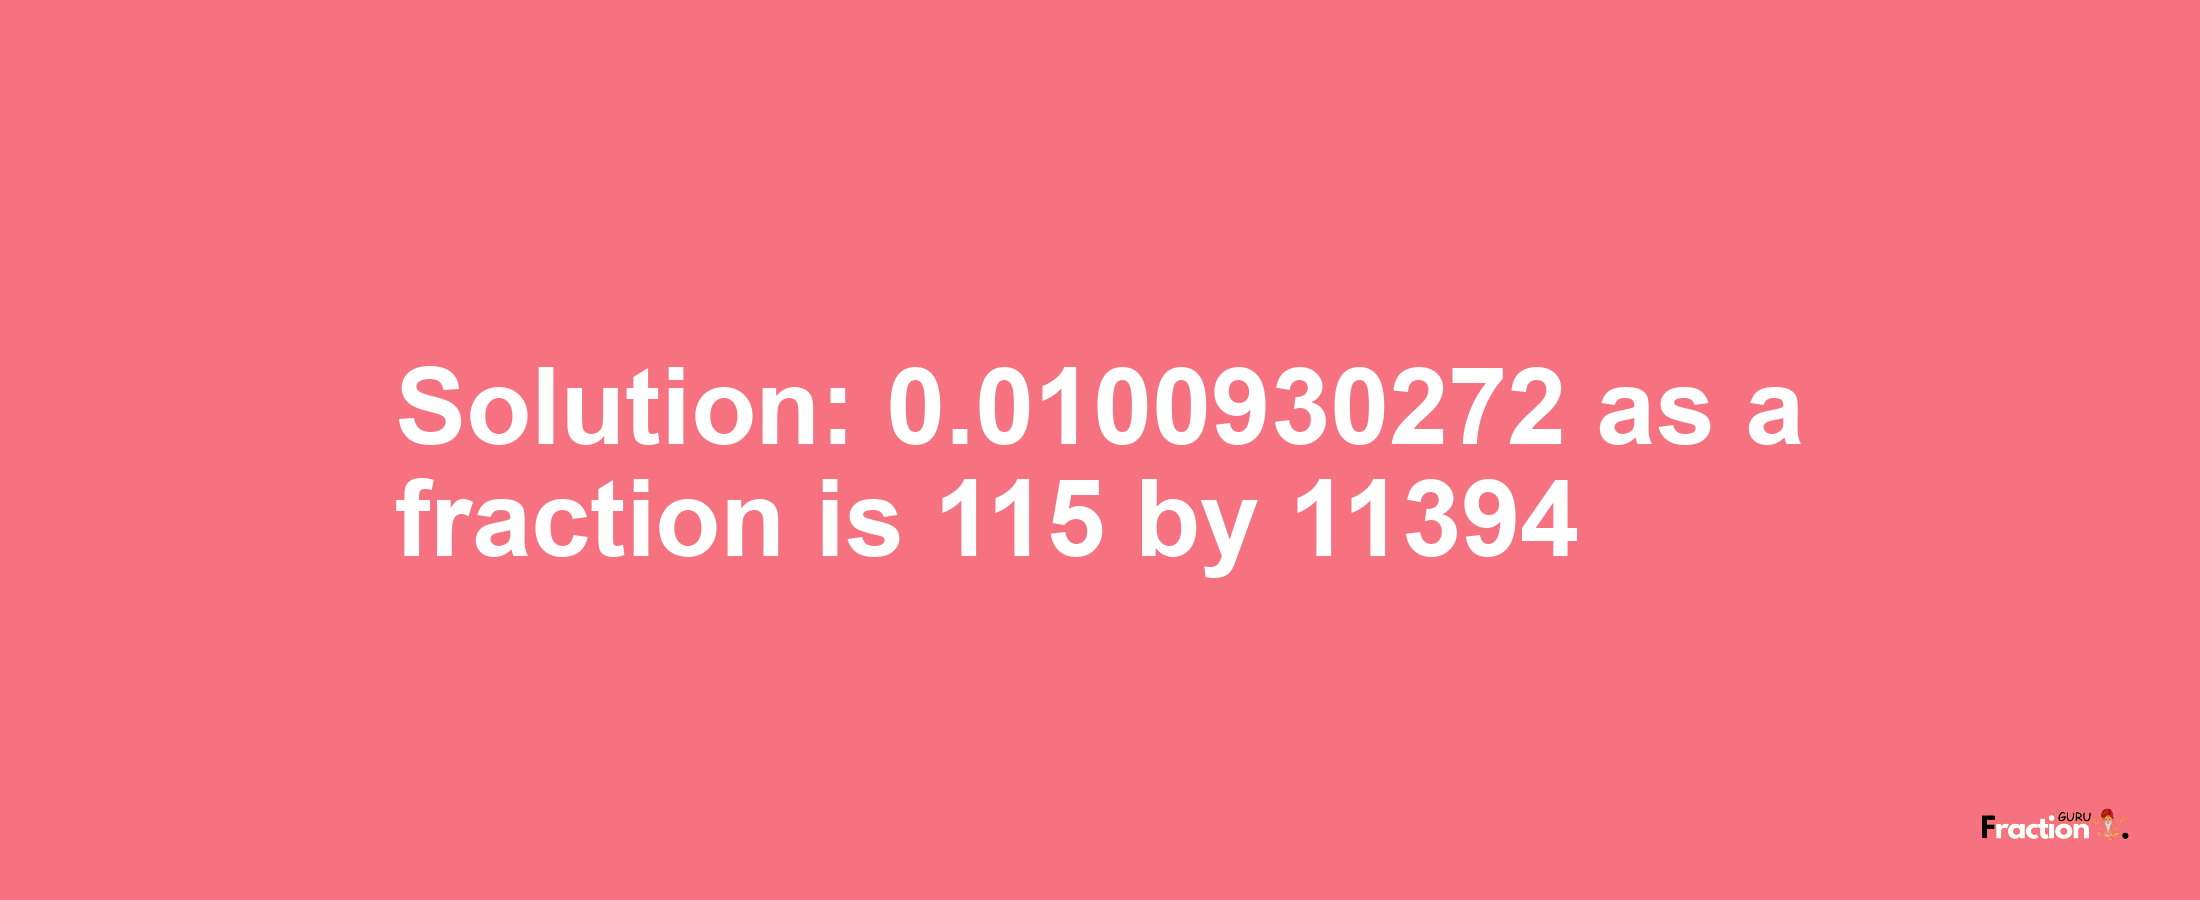 Solution:0.0100930272 as a fraction is 115/11394